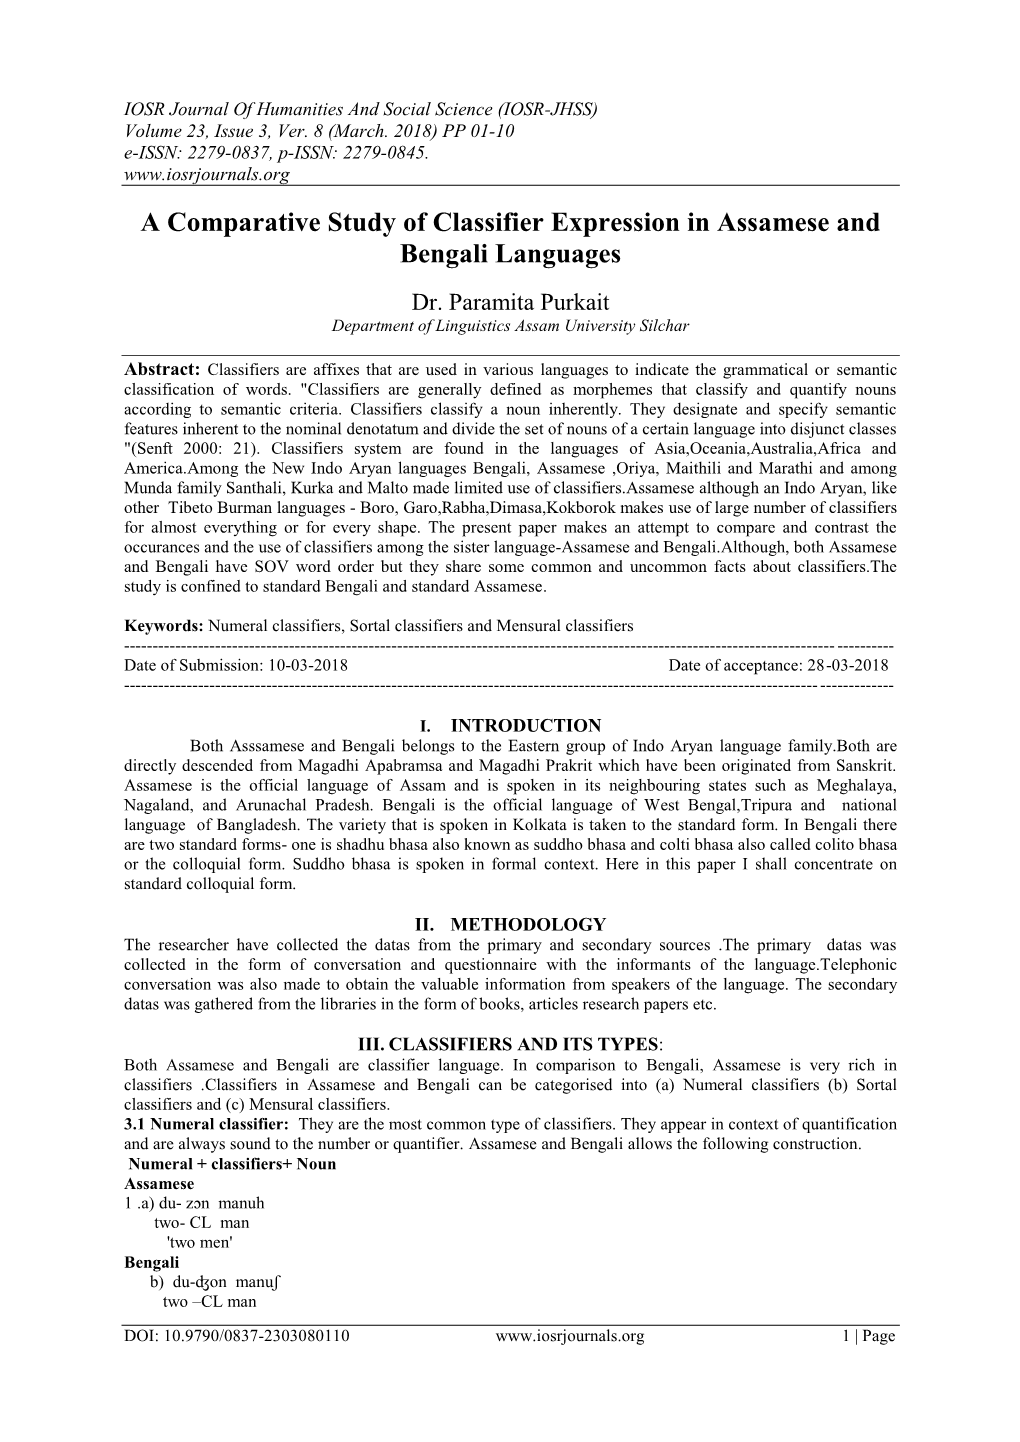 A Comparative Study of Classifier Expression in Assamese and Bengali Languages